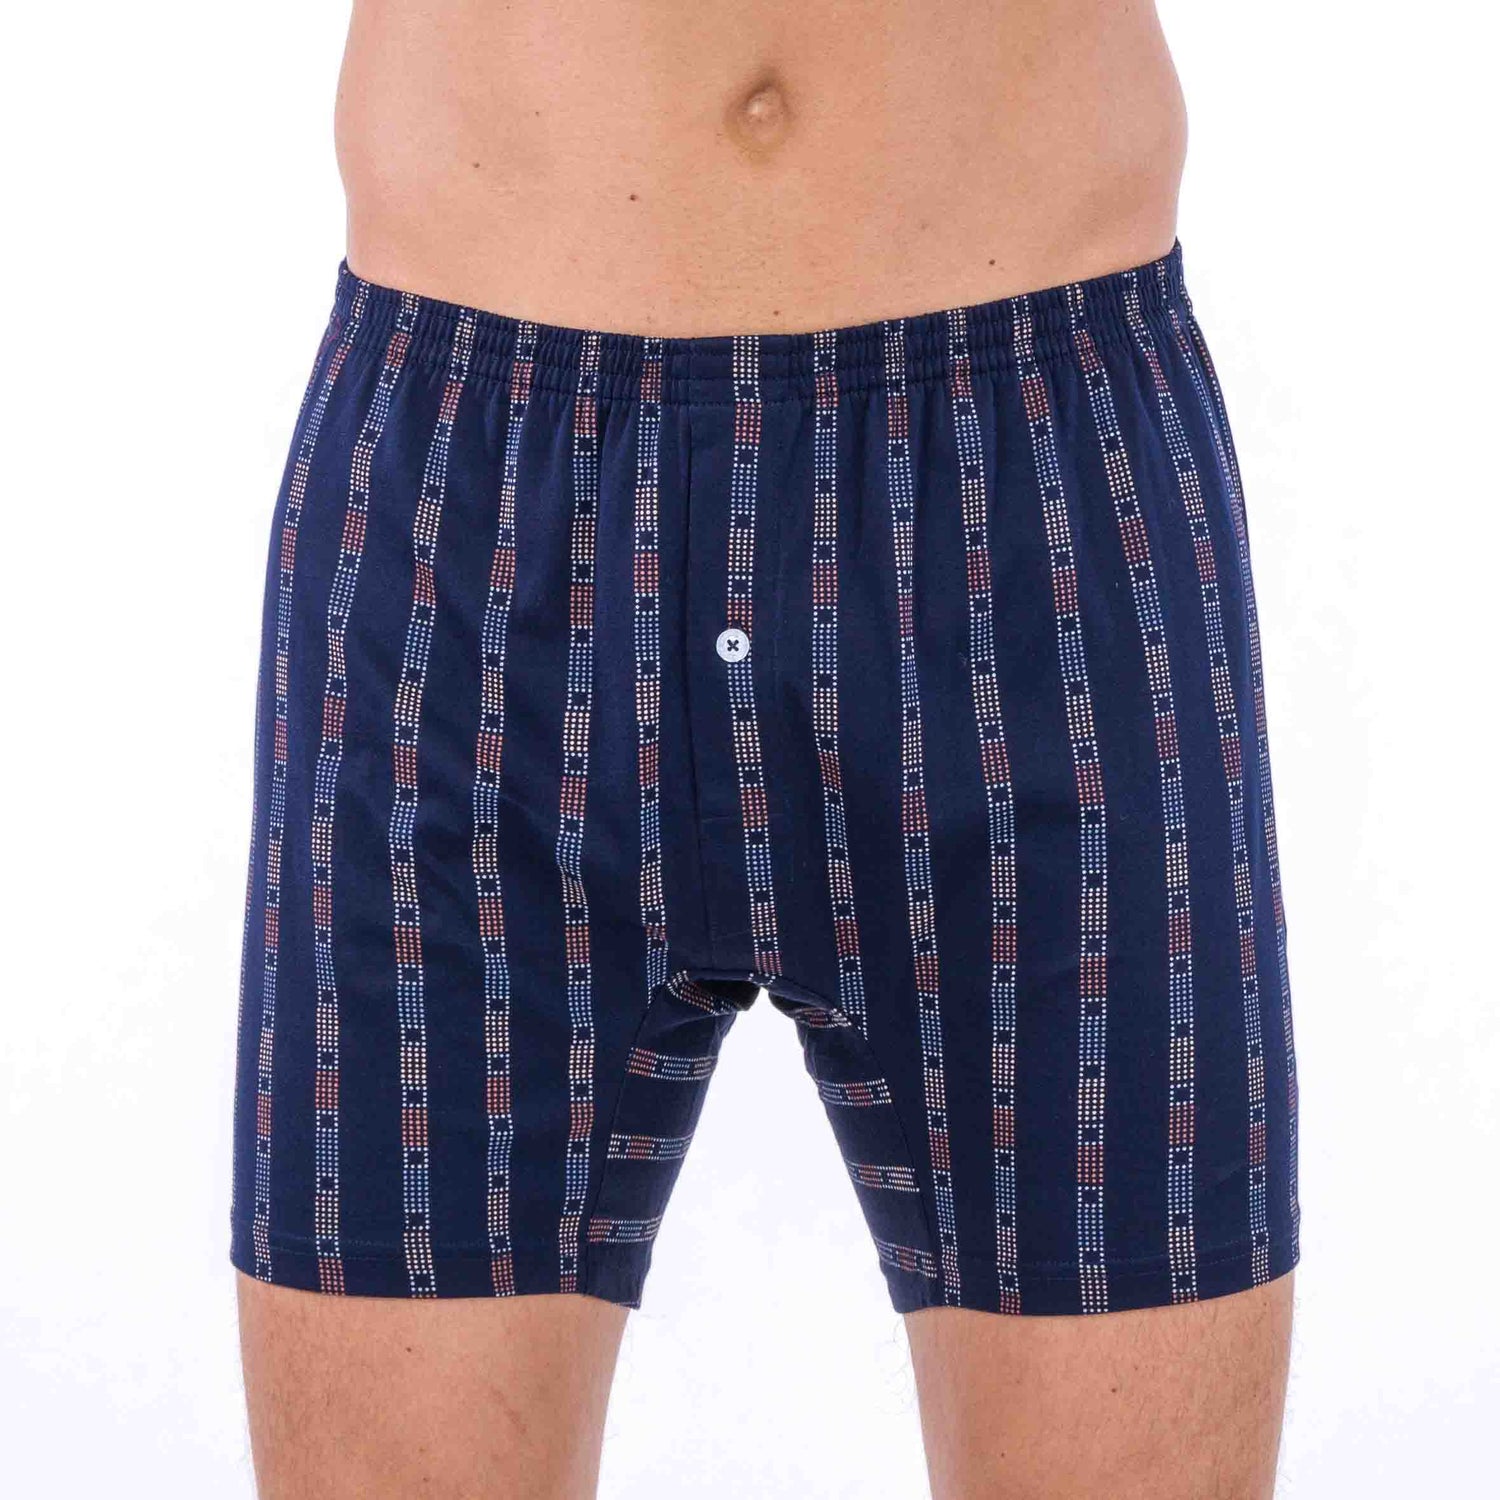 Boxer Shorts in Mercerized Cotton Jersey Printed NAVY STRIPE